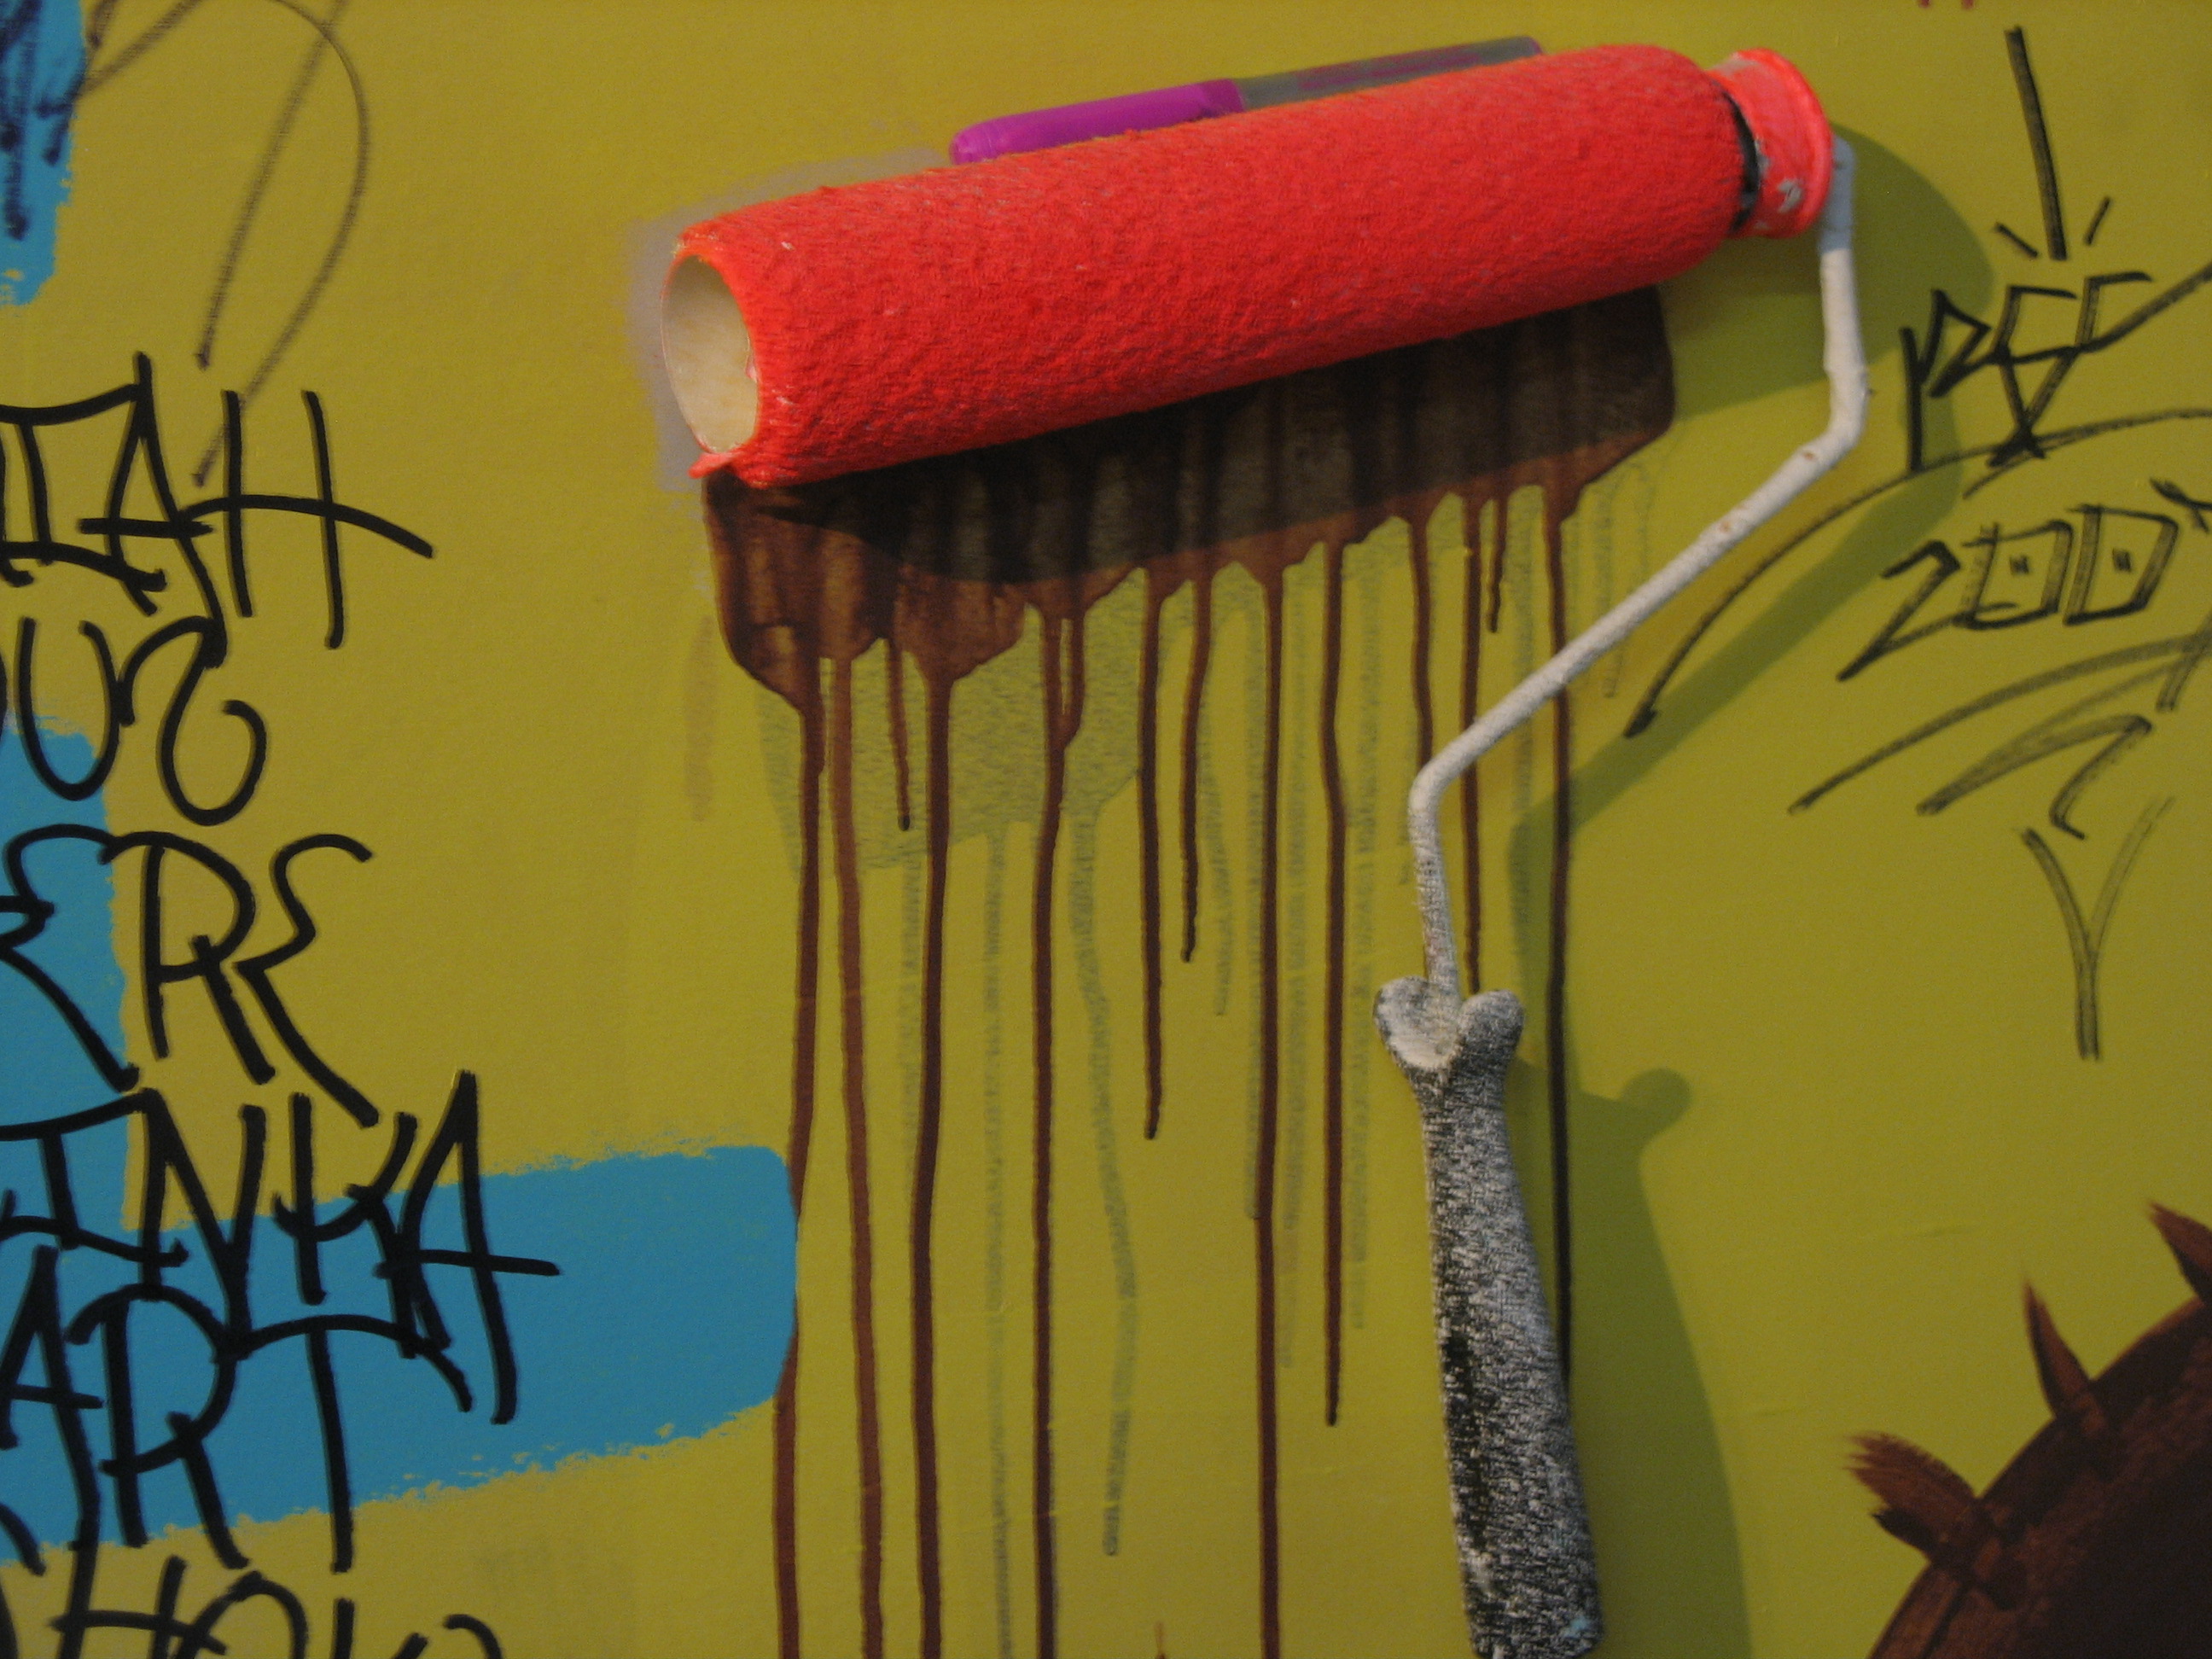 An orange paint roller is pushed against a wall. Paint drips down the wall beneath it.